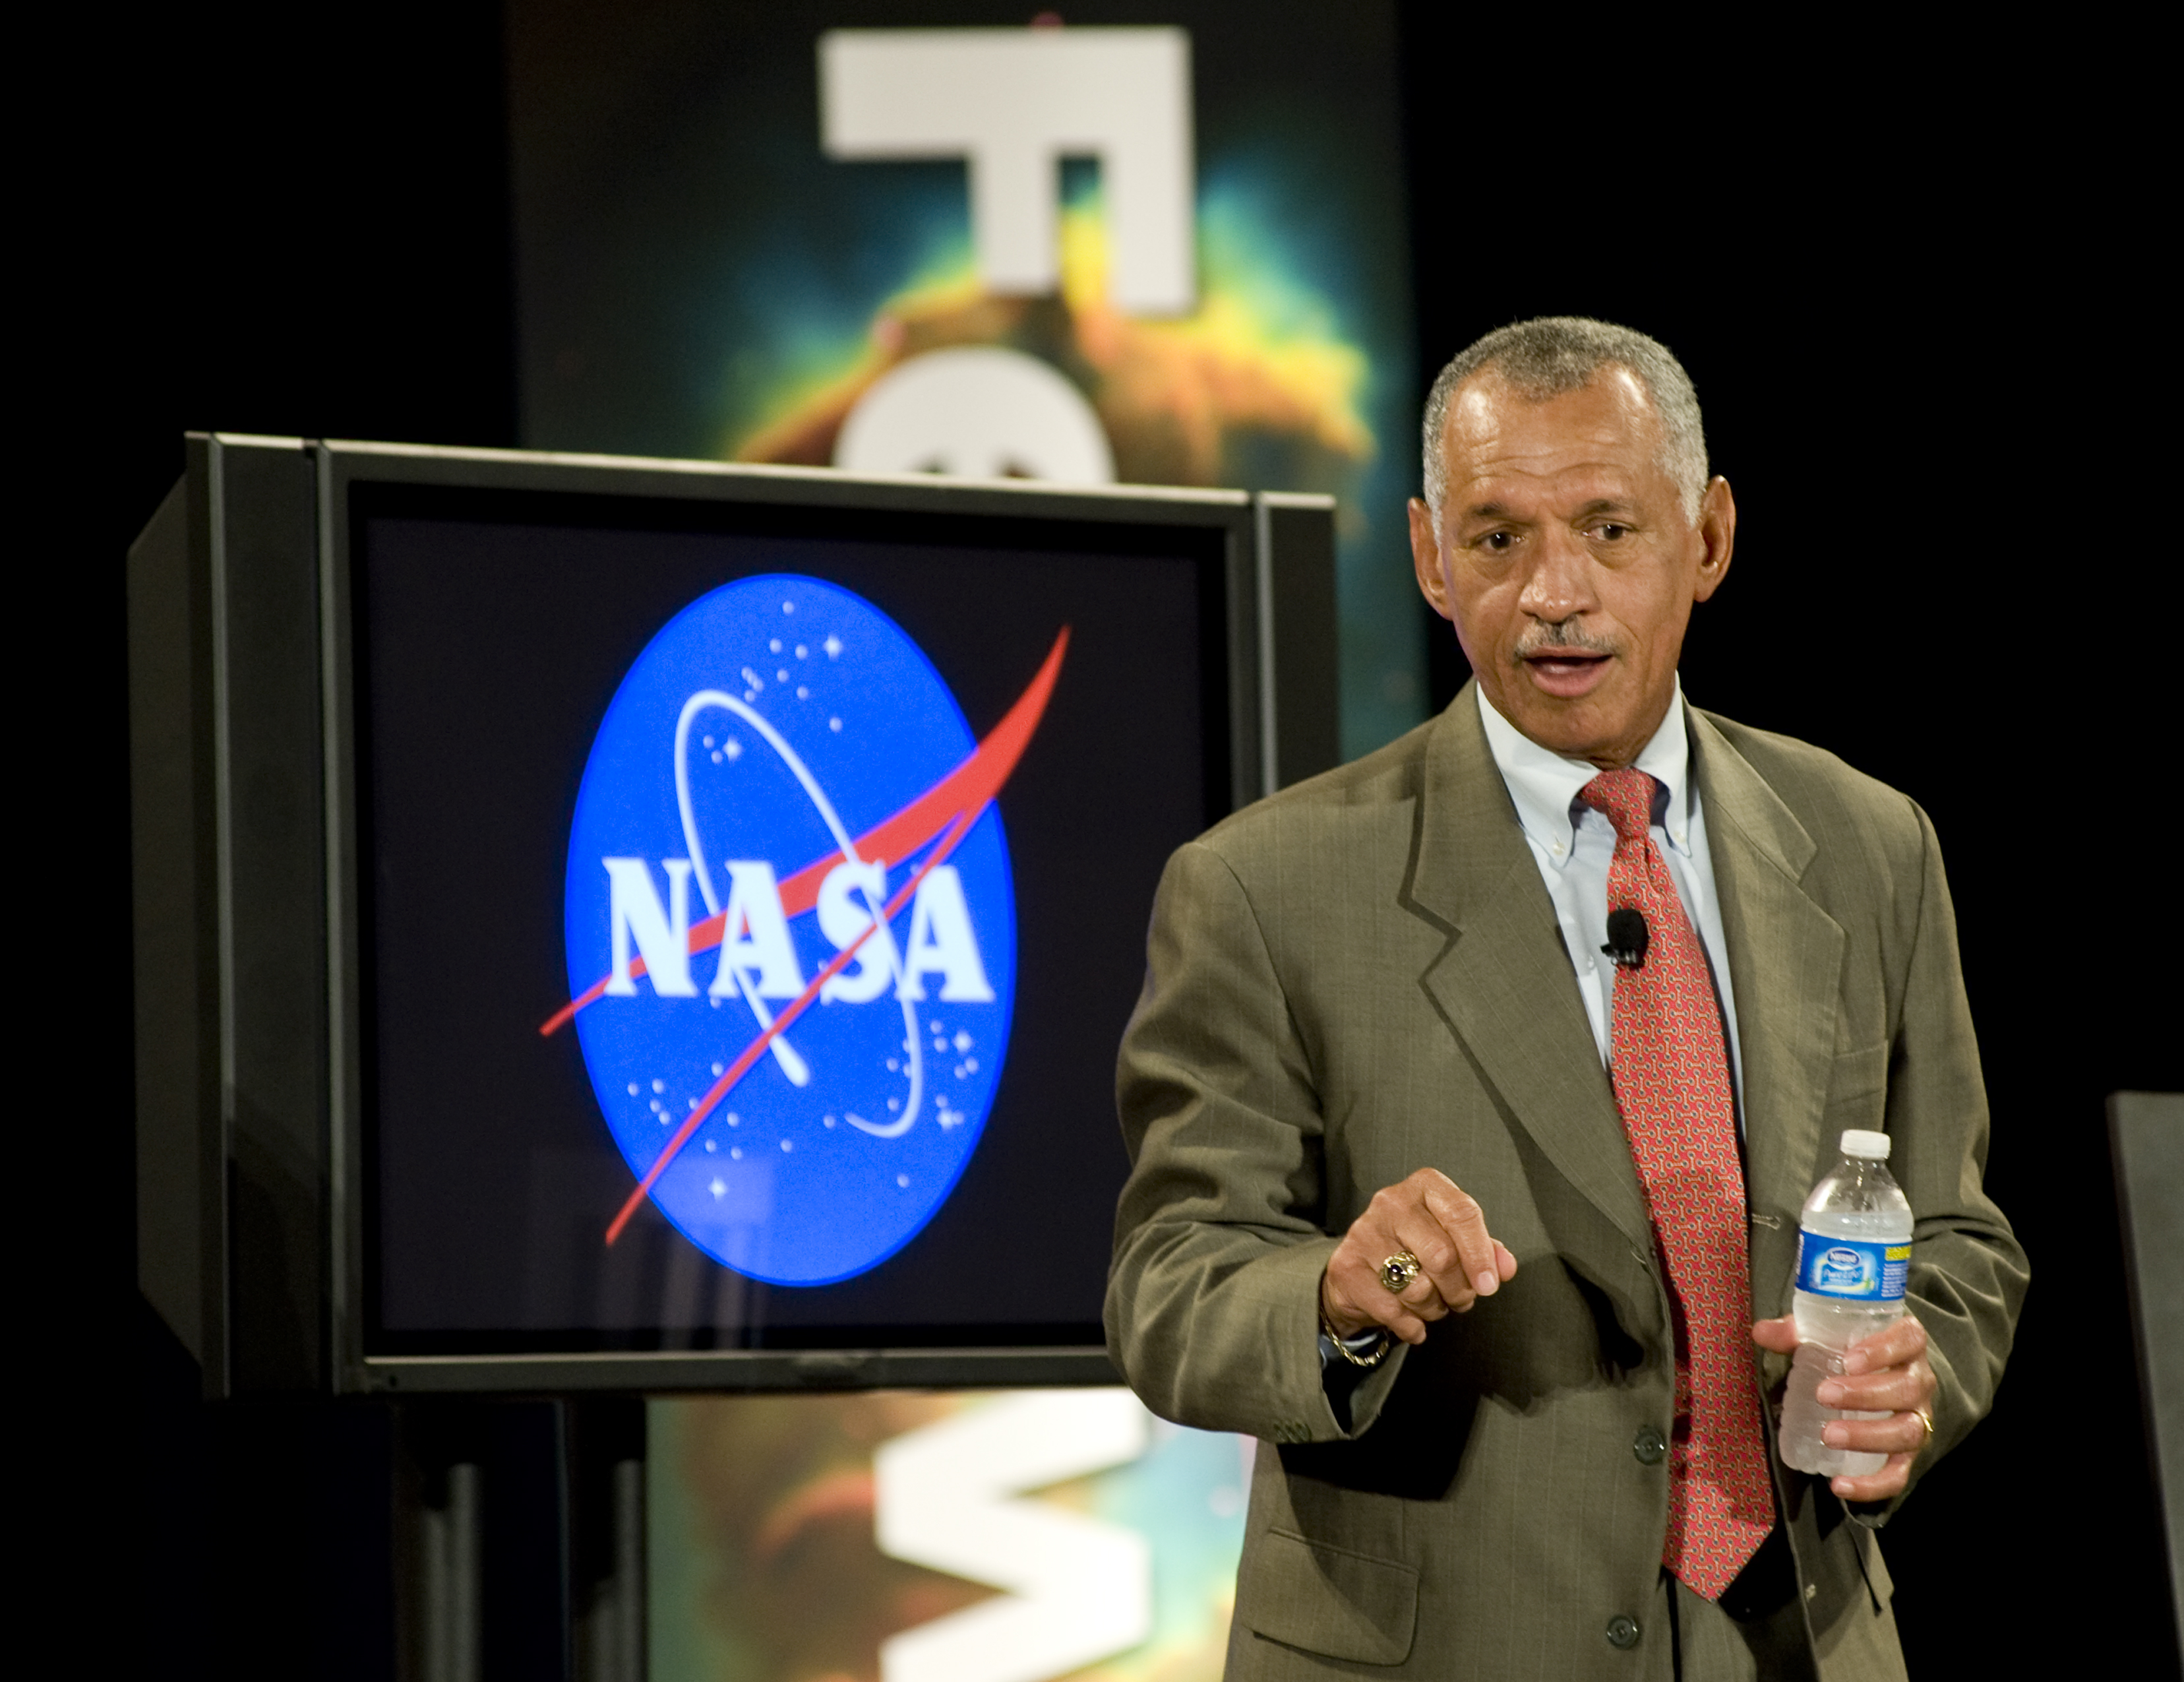 Build your own kitchen…why use Take-away – NASA CHIEF